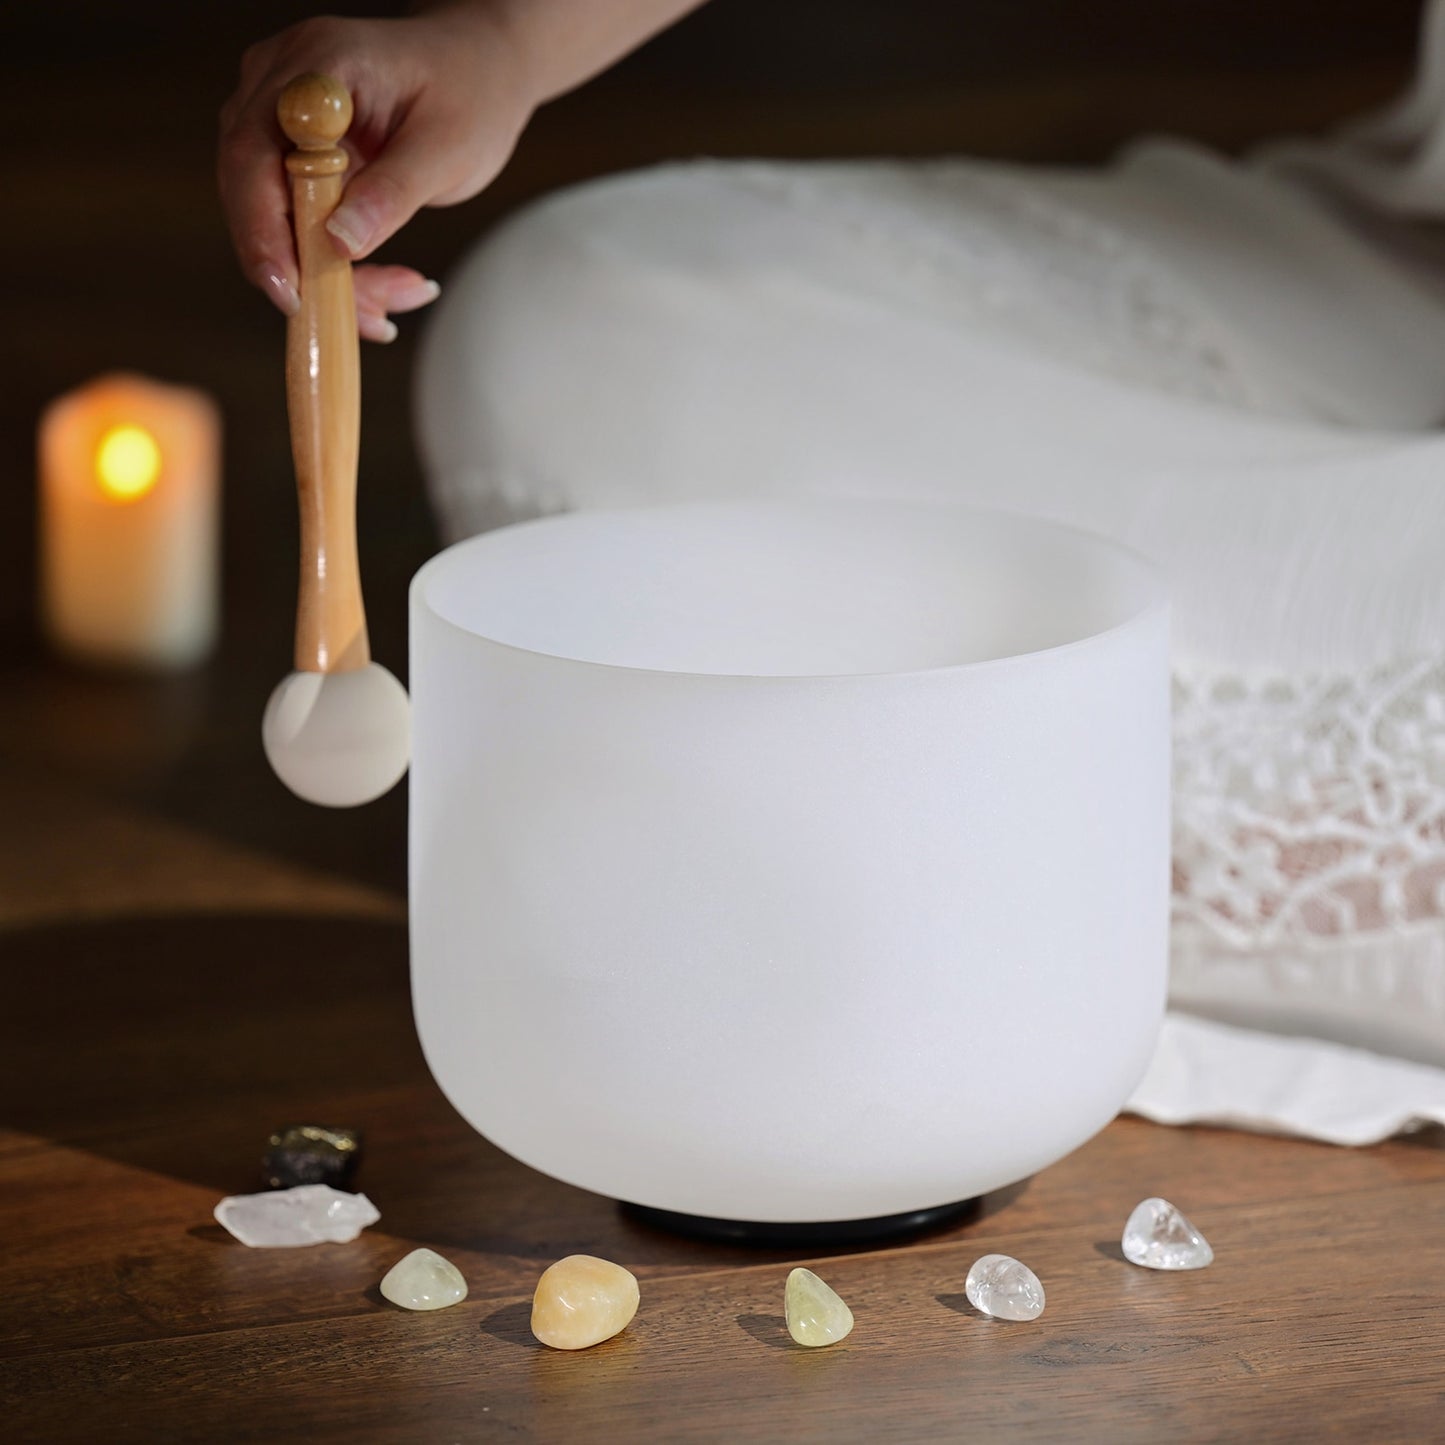 CVNC 8 Inch White Frosted Quartz Crystal Singing Bowl for Sound Healing Meditation Yoga with Free Mallet